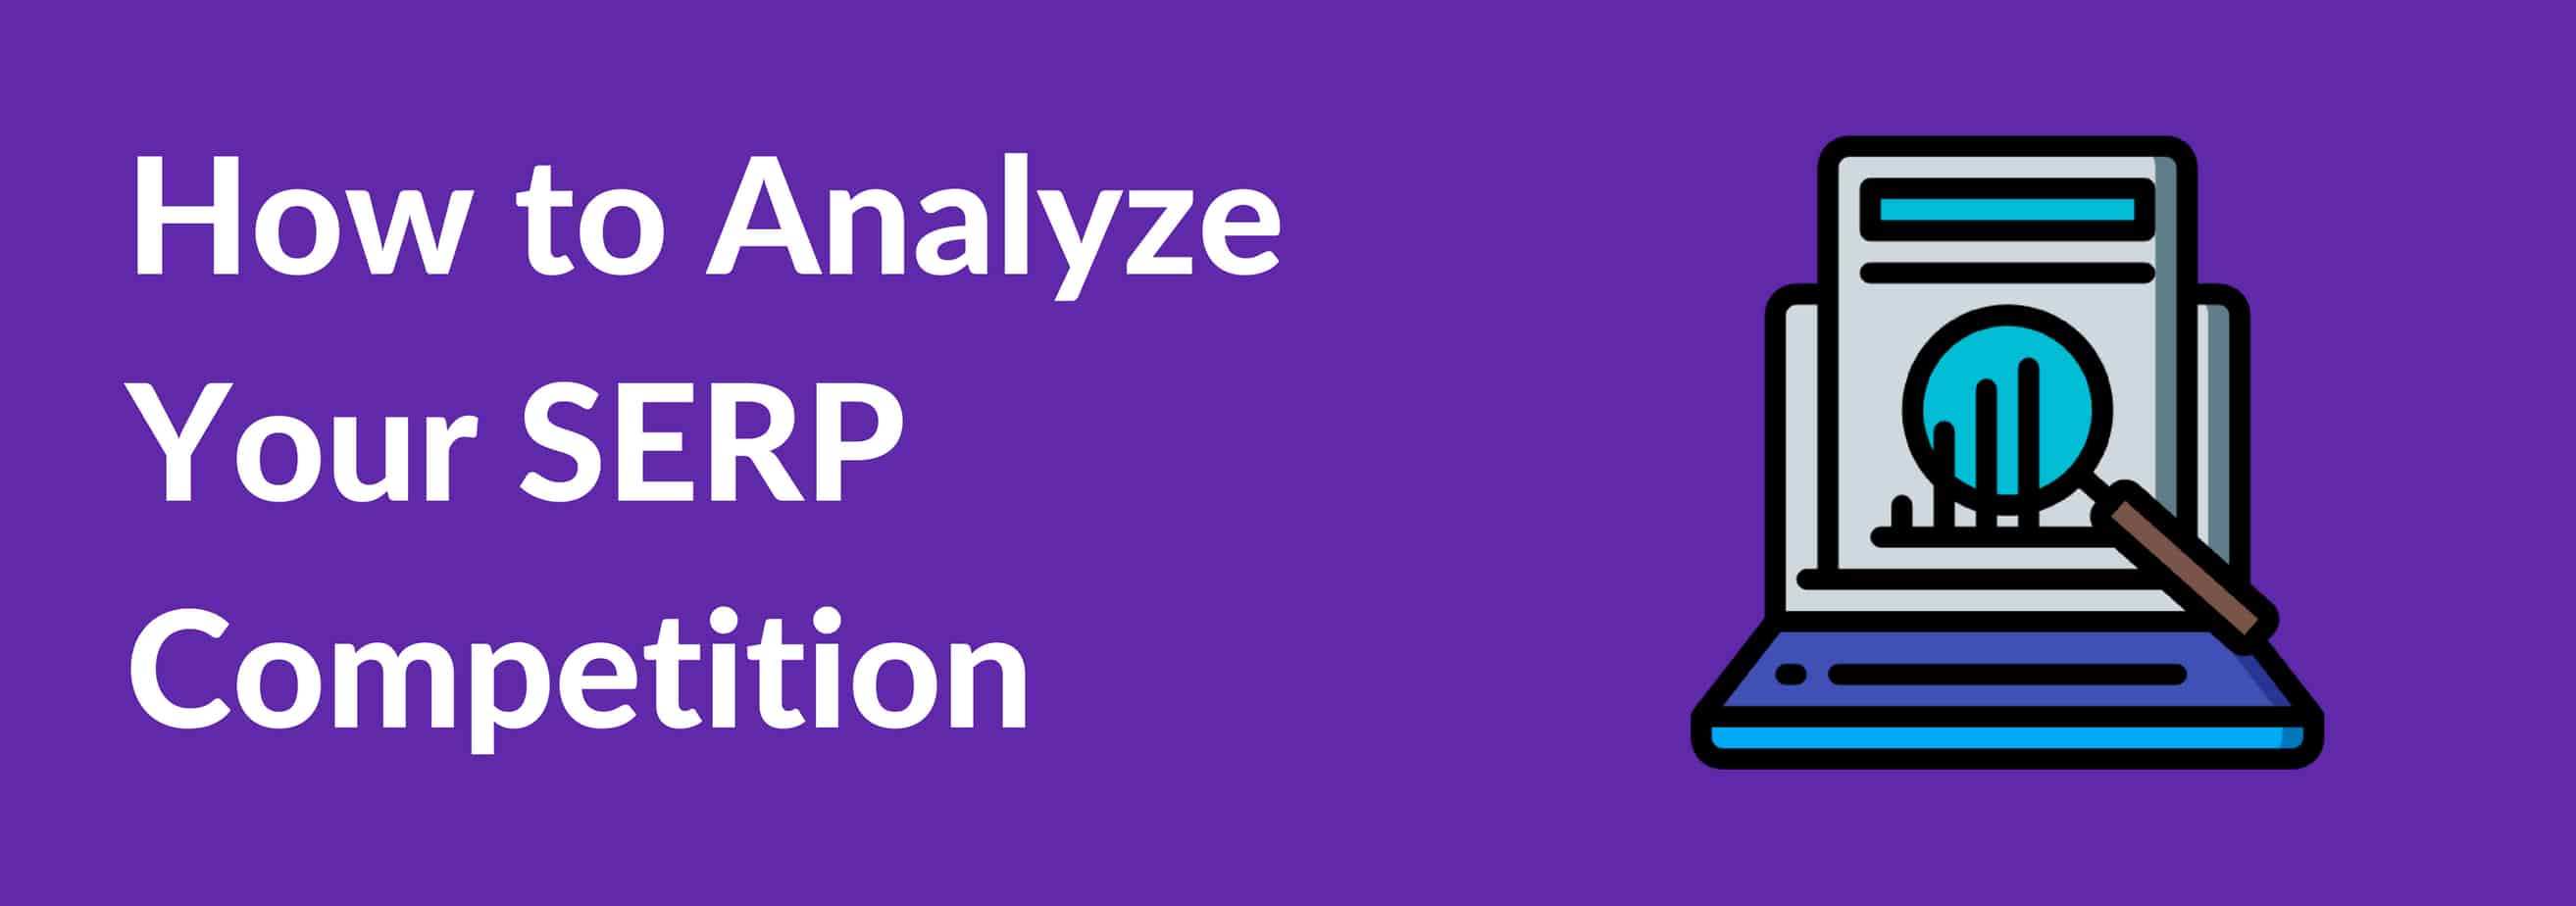 How to Analyze Your SERP Competition